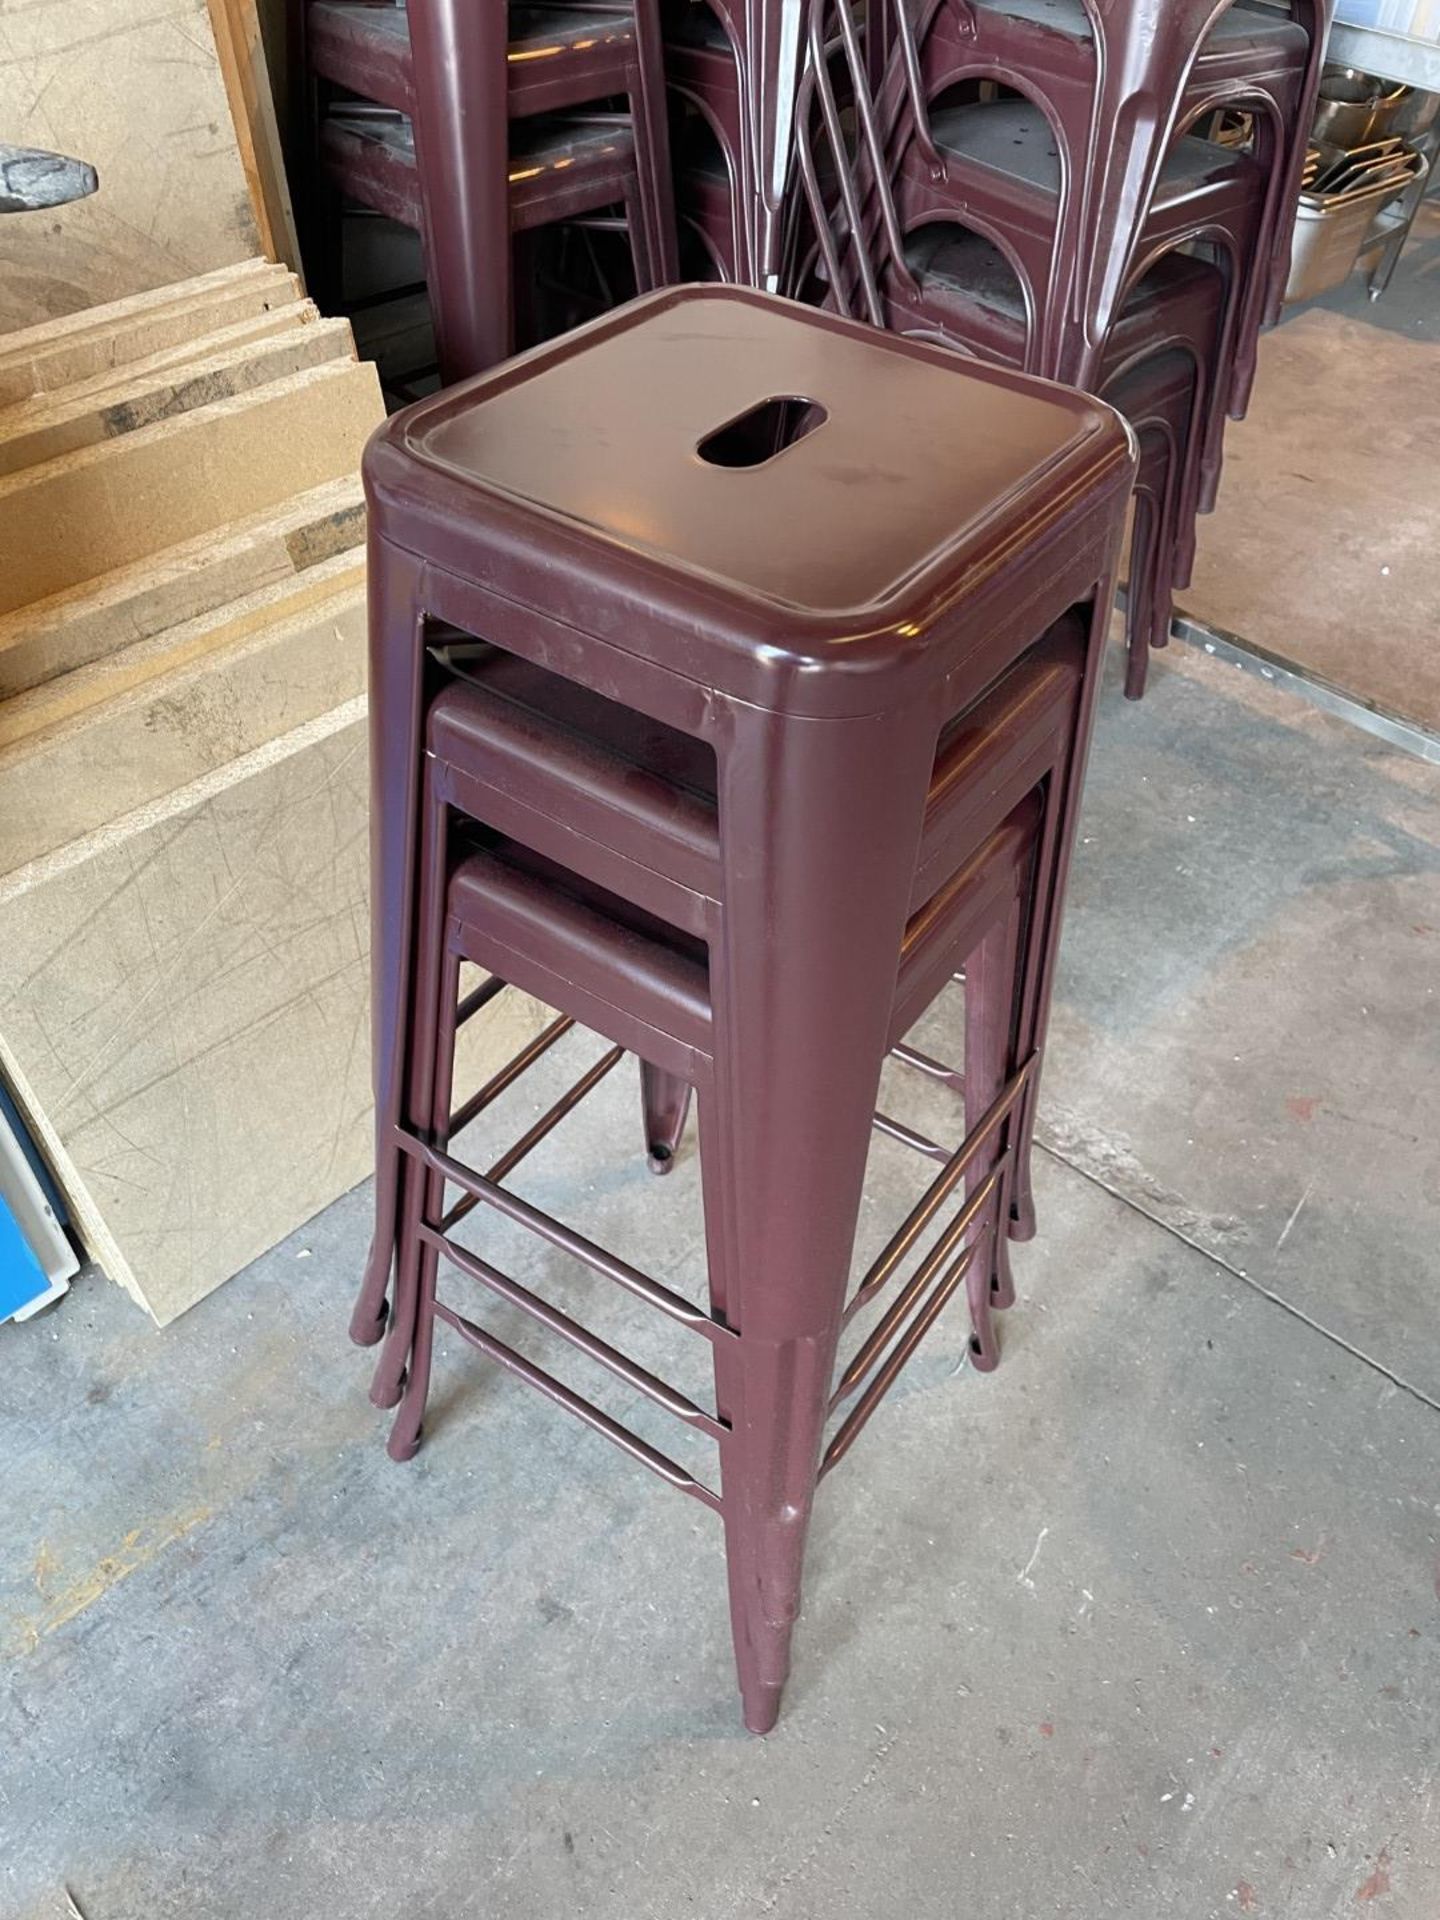 3 x Metal Bar Stools - Ref: FGN067 - CL834 - Location: Essex, RM19This lot was recently removed from - Image 2 of 3